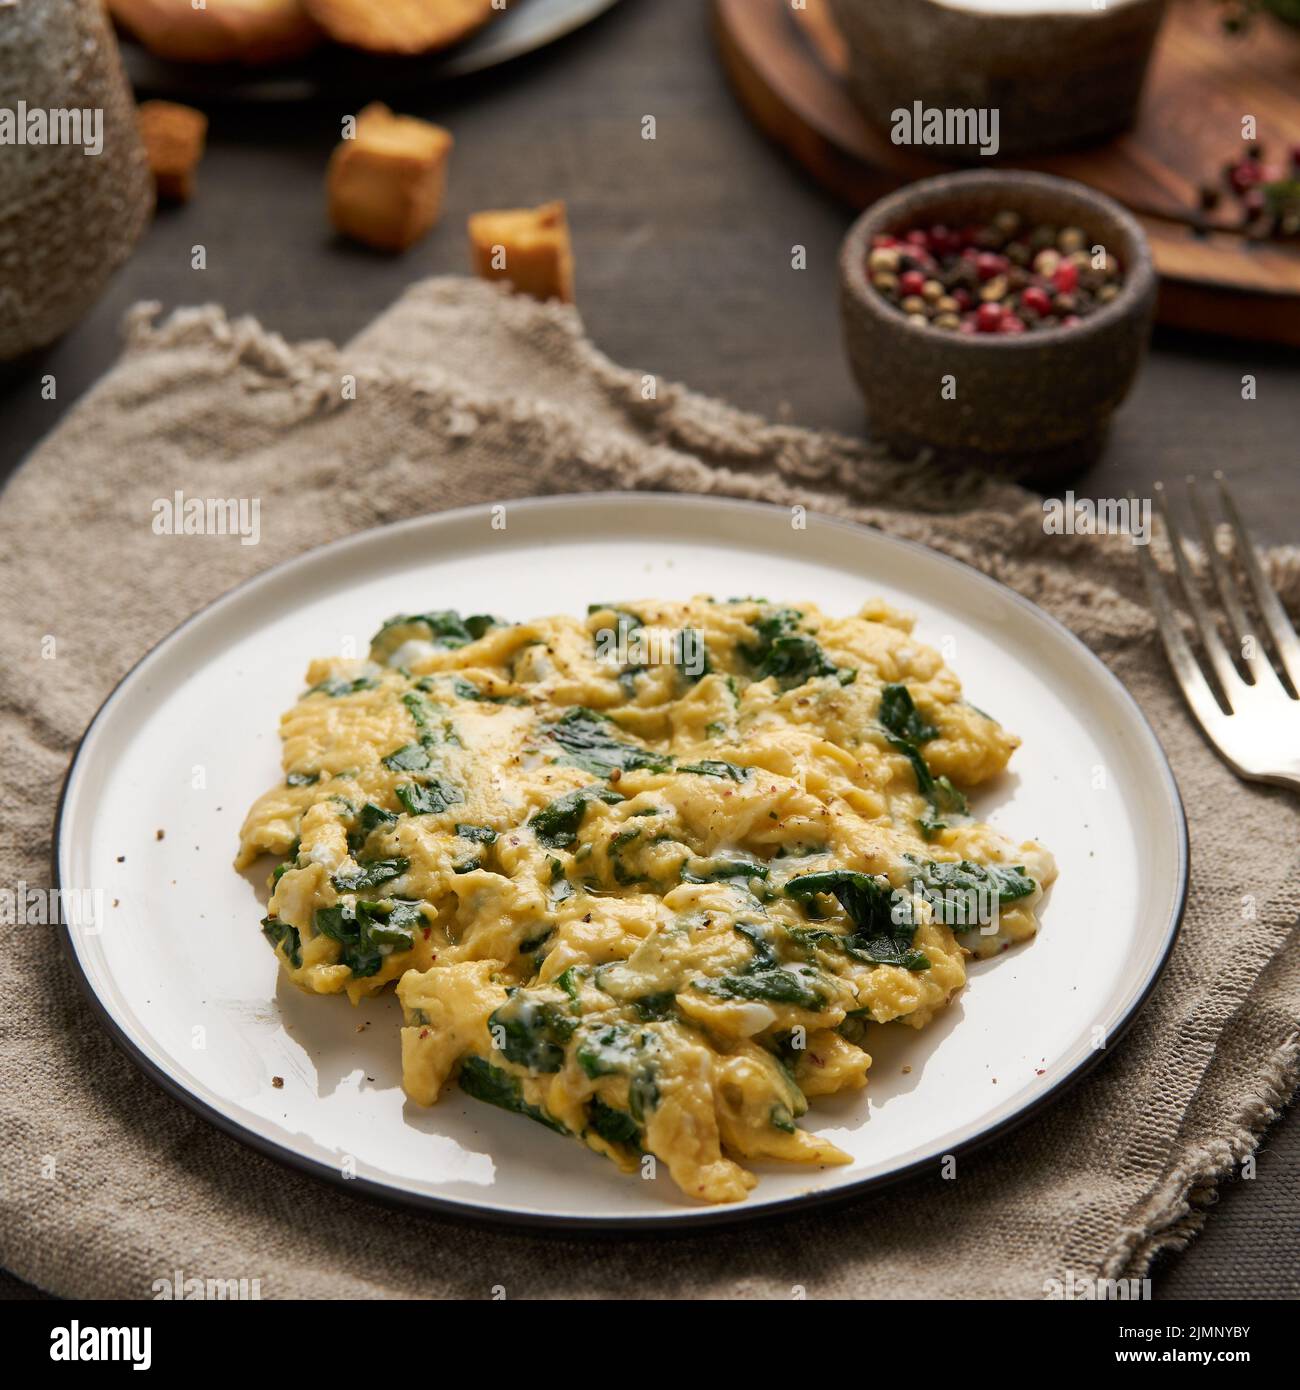 Scrambled eggs with spinach, cup of tea on dark brown background Stock Photo